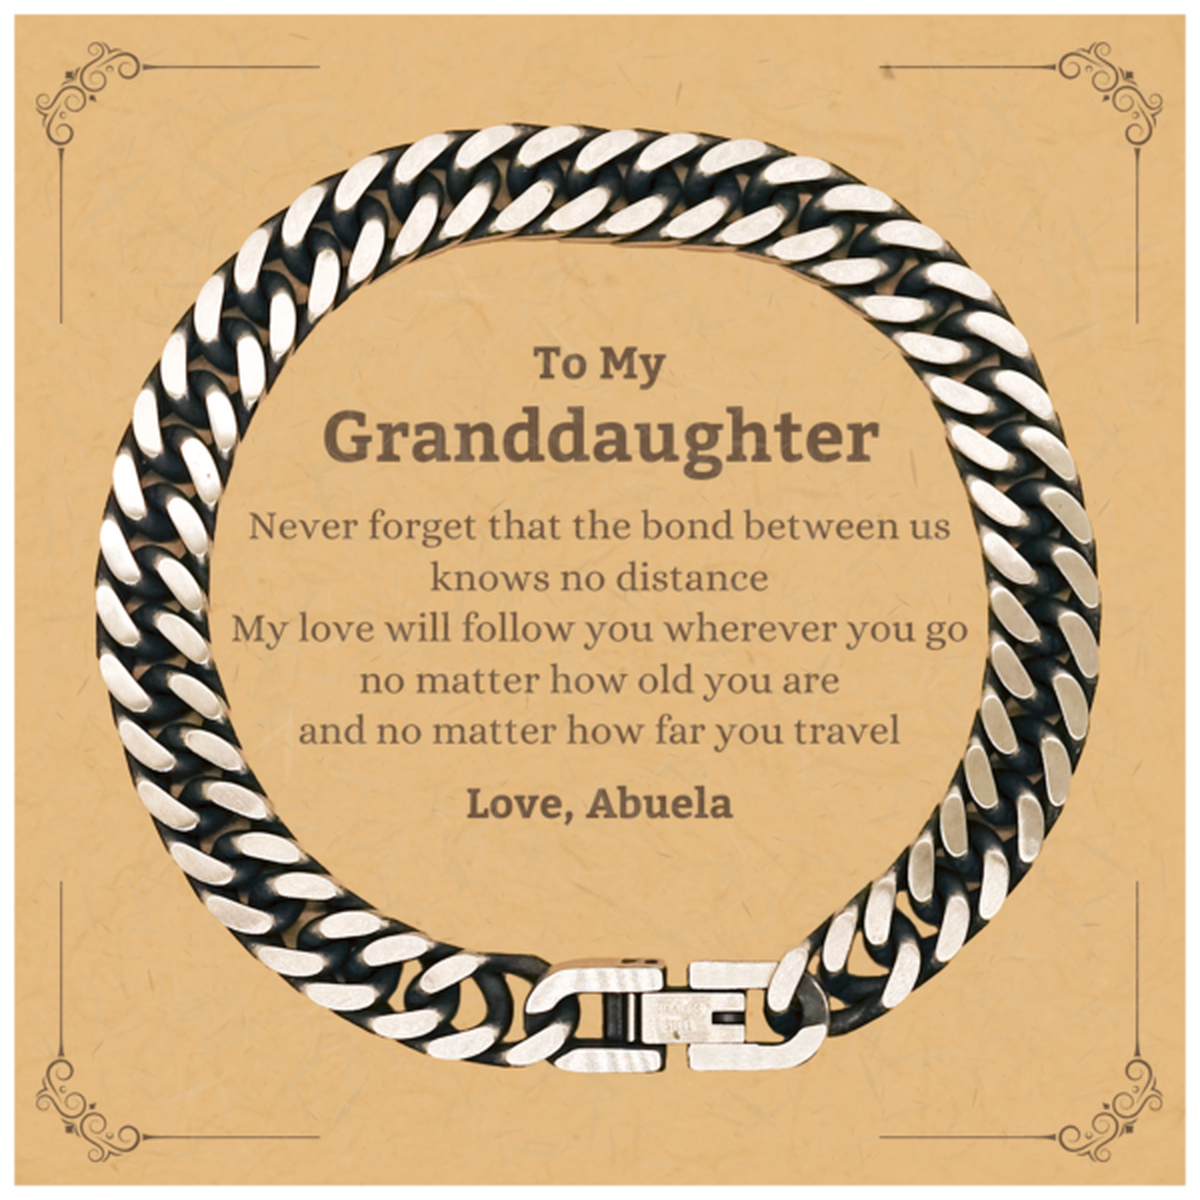 Granddaughter Birthday Gifts from Abuela, Adjustable Cuban Link Chain Bracelet for Granddaughter Christmas Graduation Unique Gifts Granddaughter Never forget that the bond between us knows no distance. Love, Abuela